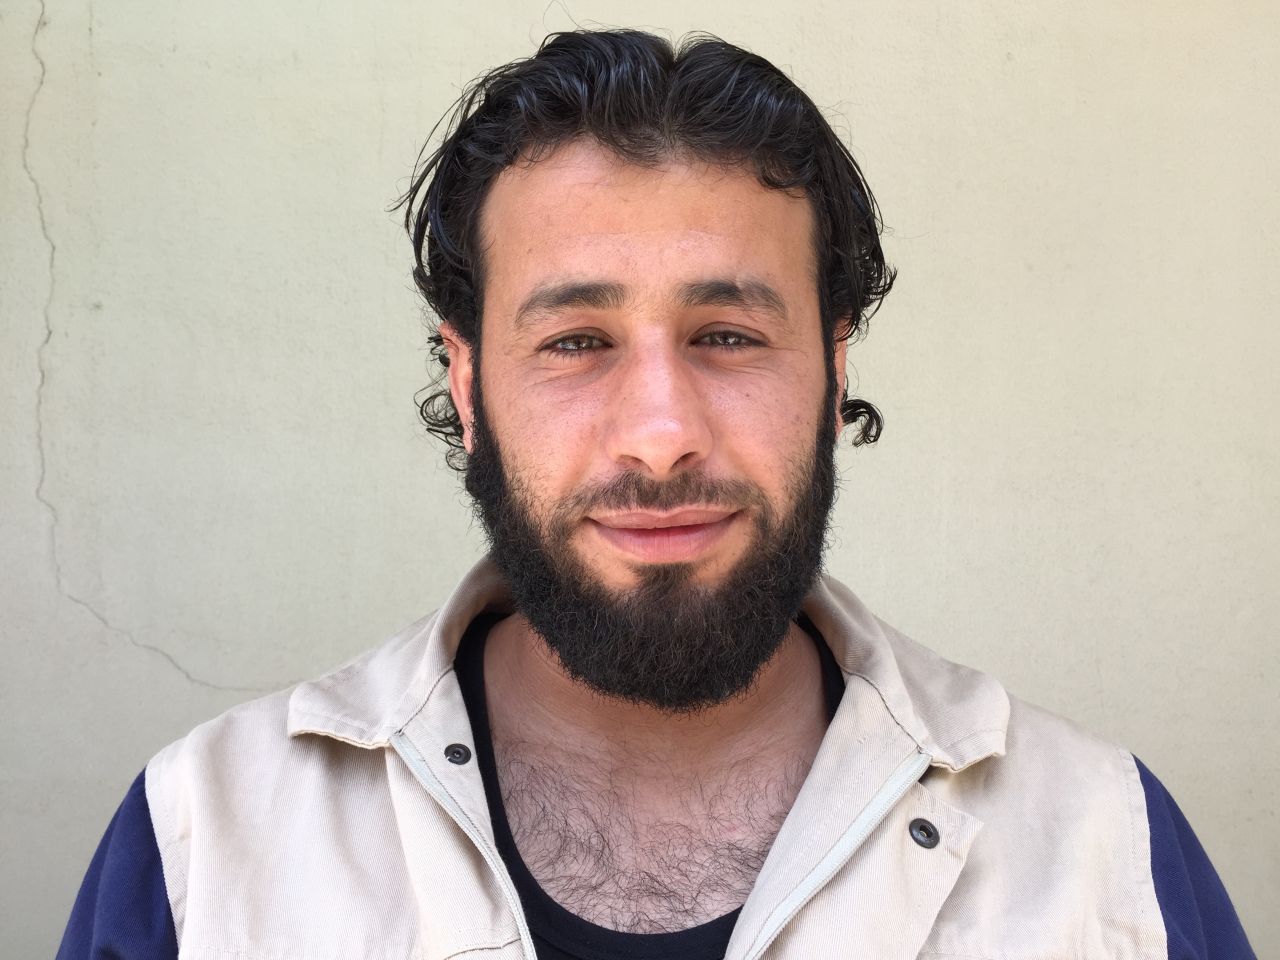 Yamen Yoused, 27. Construction. "Two days before I came to this course, I rescued a 2-year-old baby. His dad told me where he was trapped and buried. We went and found him alive, but his 14-year-old sister had died."